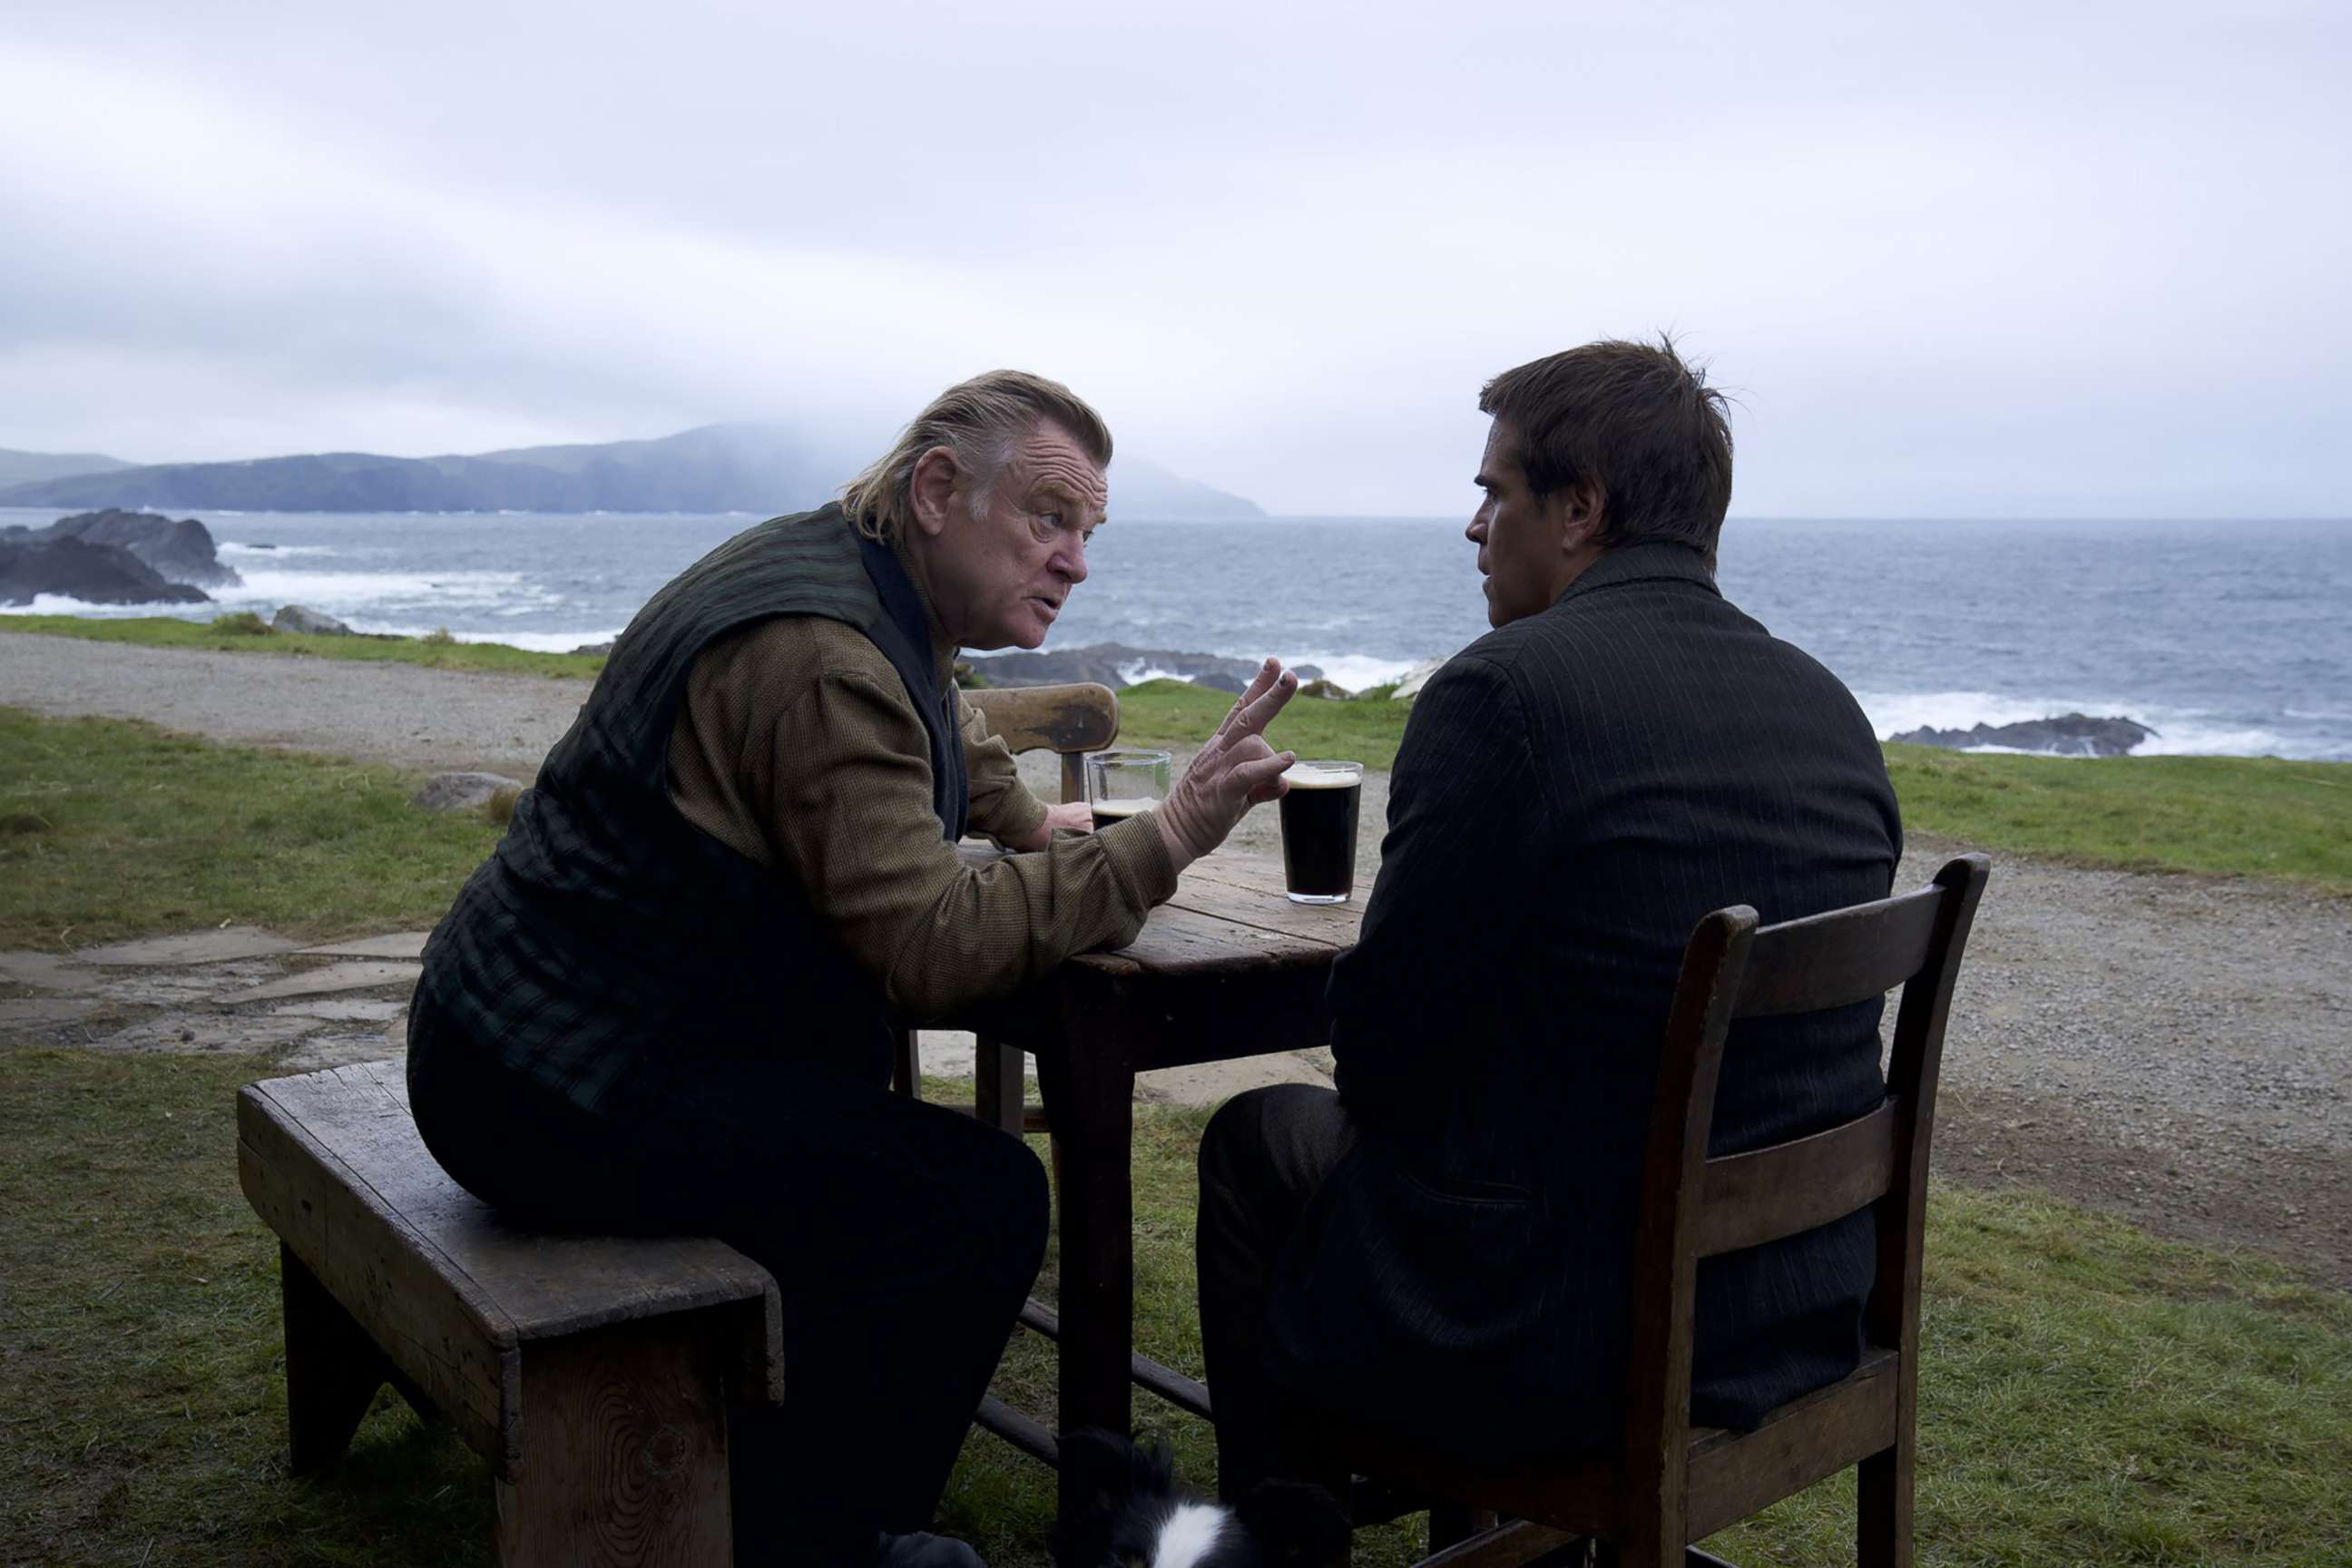 PHOTO: Brendan Gleeson and Colin Farrell in a scene from the film "The Banshees of Inisherin."